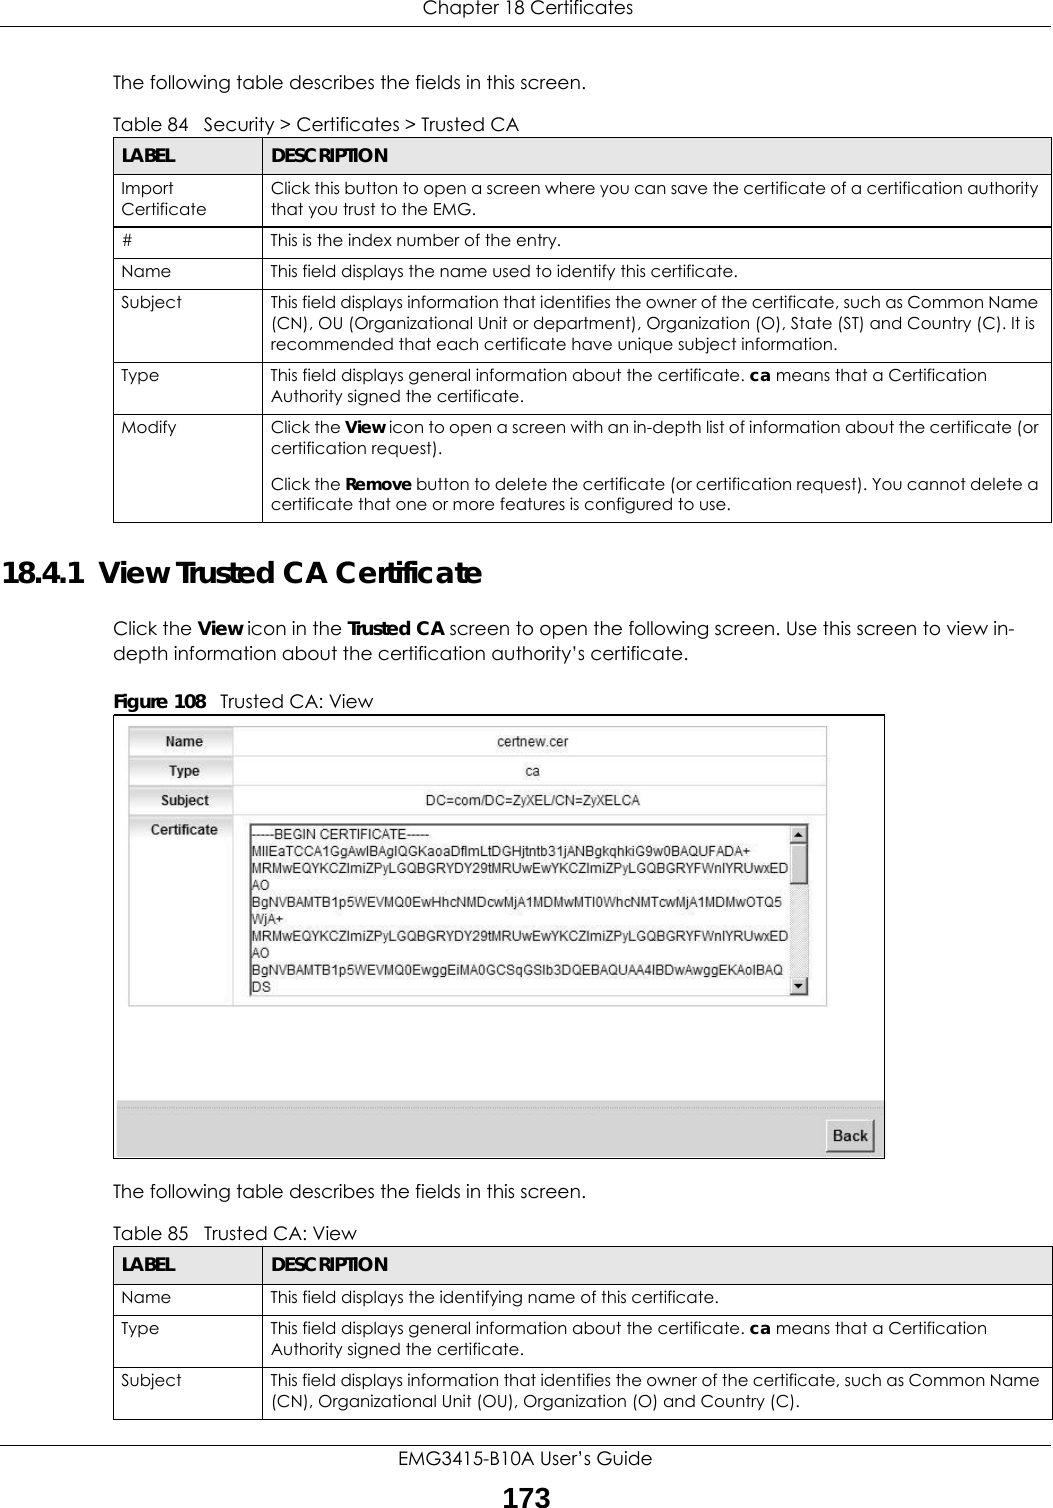  Chapter 18 CertificatesEMG3415-B10A User’s Guide173The following table describes the fields in this screen. 18.4.1  View Trusted CA CertificateClick the View icon in the Trusted CA screen to open the following screen. Use this screen to view in-depth information about the certification authority’s certificate.Figure 108   Trusted CA: View The following table describes the fields in this screen. Table 84   Security &gt; Certificates &gt; Trusted CALABEL DESCRIPTIONImport CertificateClick this button to open a screen where you can save the certificate of a certification authority that you trust to the EMG.# This is the index number of the entry.Name This field displays the name used to identify this certificate. Subject This field displays information that identifies the owner of the certificate, such as Common Name (CN), OU (Organizational Unit or department), Organization (O), State (ST) and Country (C). It is recommended that each certificate have unique subject information.Type This field displays general information about the certificate. ca means that a Certification Authority signed the certificate. Modify Click the View icon to open a screen with an in-depth list of information about the certificate (or certification request).Click the Remove button to delete the certificate (or certification request). You cannot delete a certificate that one or more features is configured to use.Table 85   Trusted CA: ViewLABEL DESCRIPTIONName This field displays the identifying name of this certificate. Type This field displays general information about the certificate. ca means that a Certification Authority signed the certificate. Subject This field displays information that identifies the owner of the certificate, such as Common Name (CN), Organizational Unit (OU), Organization (O) and Country (C).